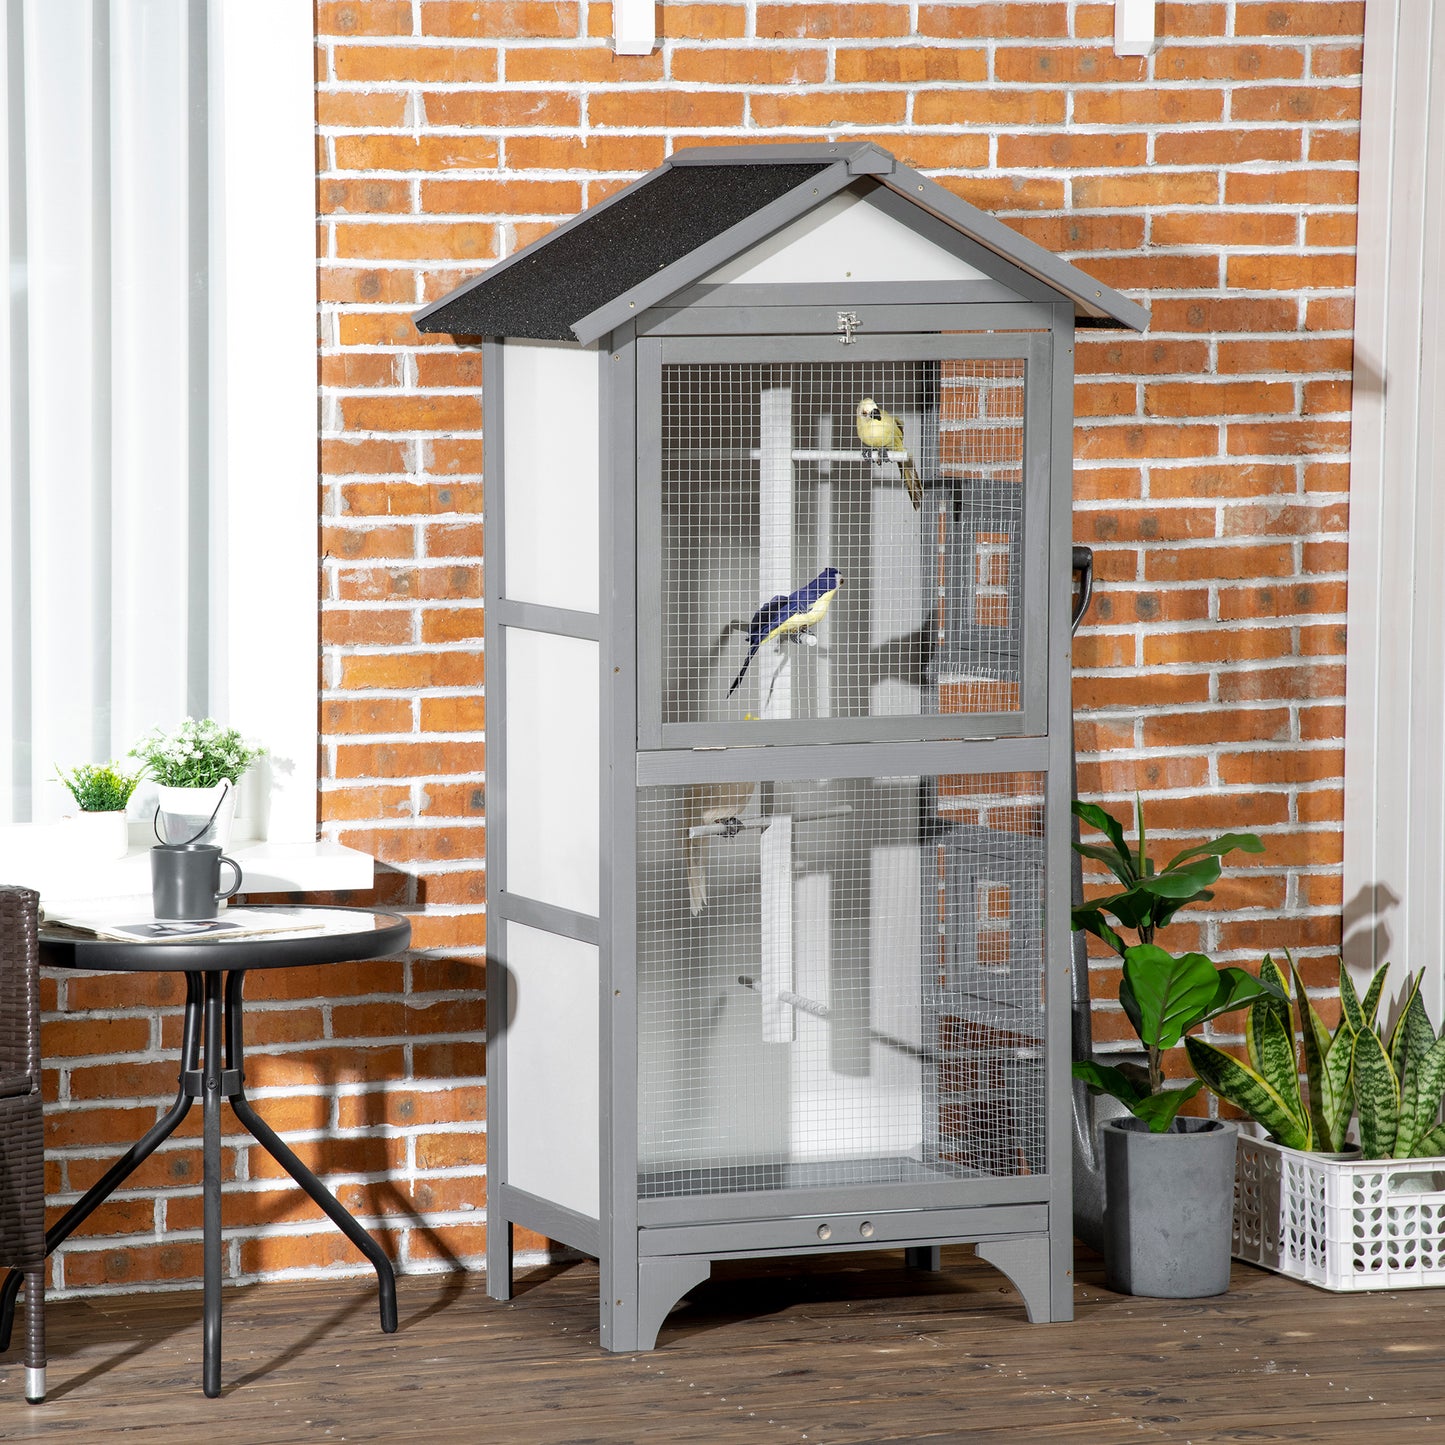 Wooden Bird Aviary Parrot Cage Pet Furniture with Removable Bottom Tray, 2 Doors, Asphalt Roof, 4 Perches, Light Grey at Gallery Canada